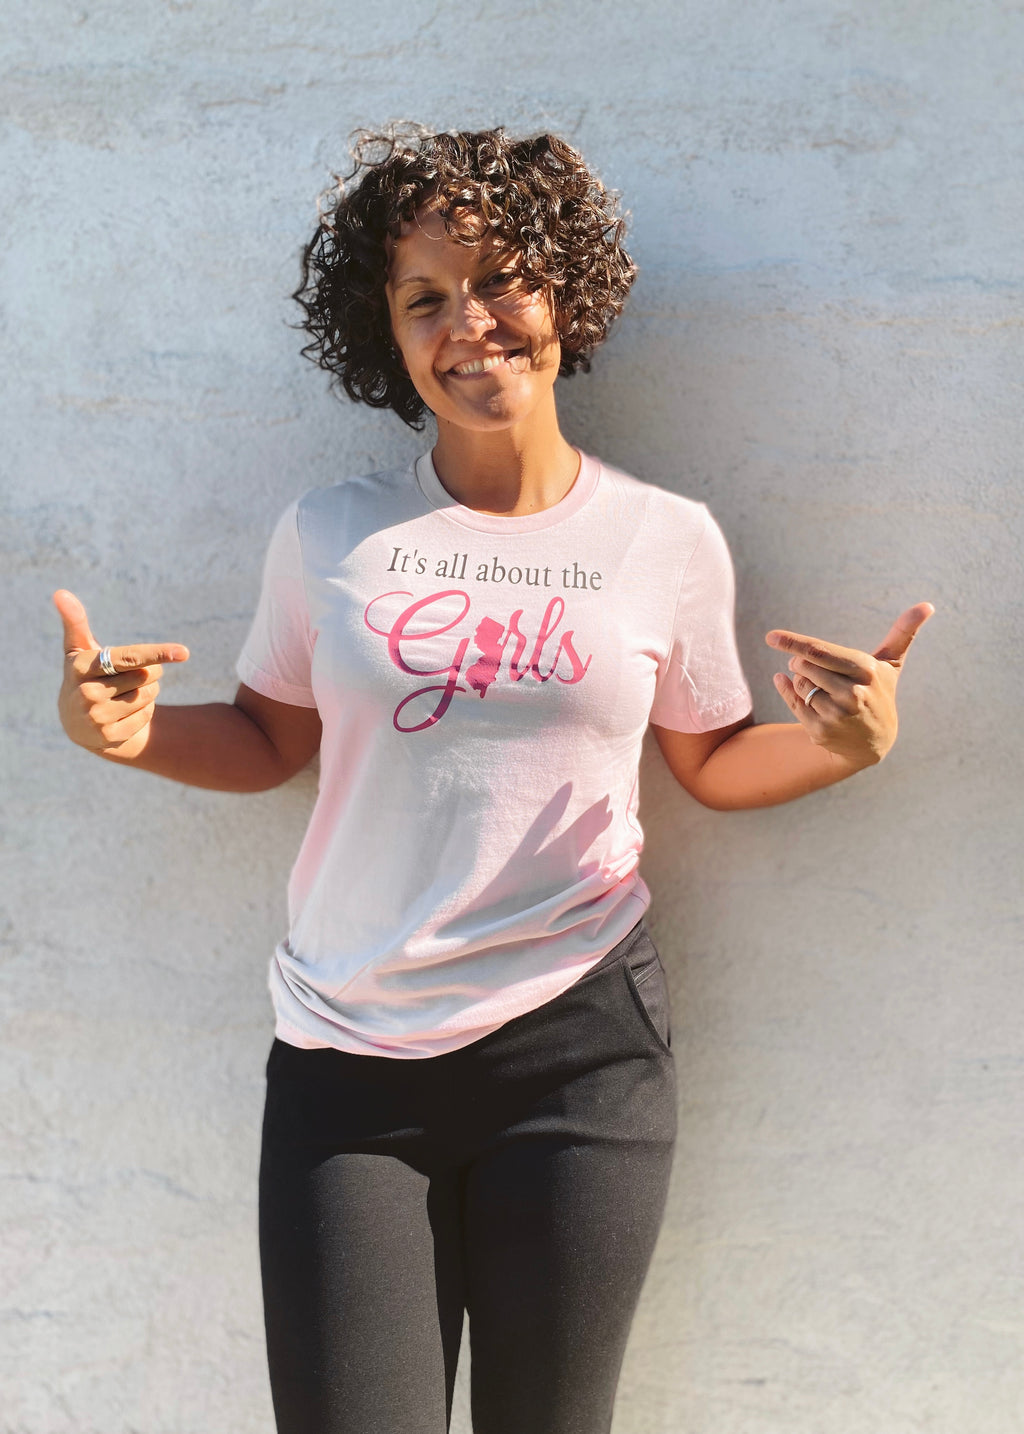 It's All About The Girls Tee